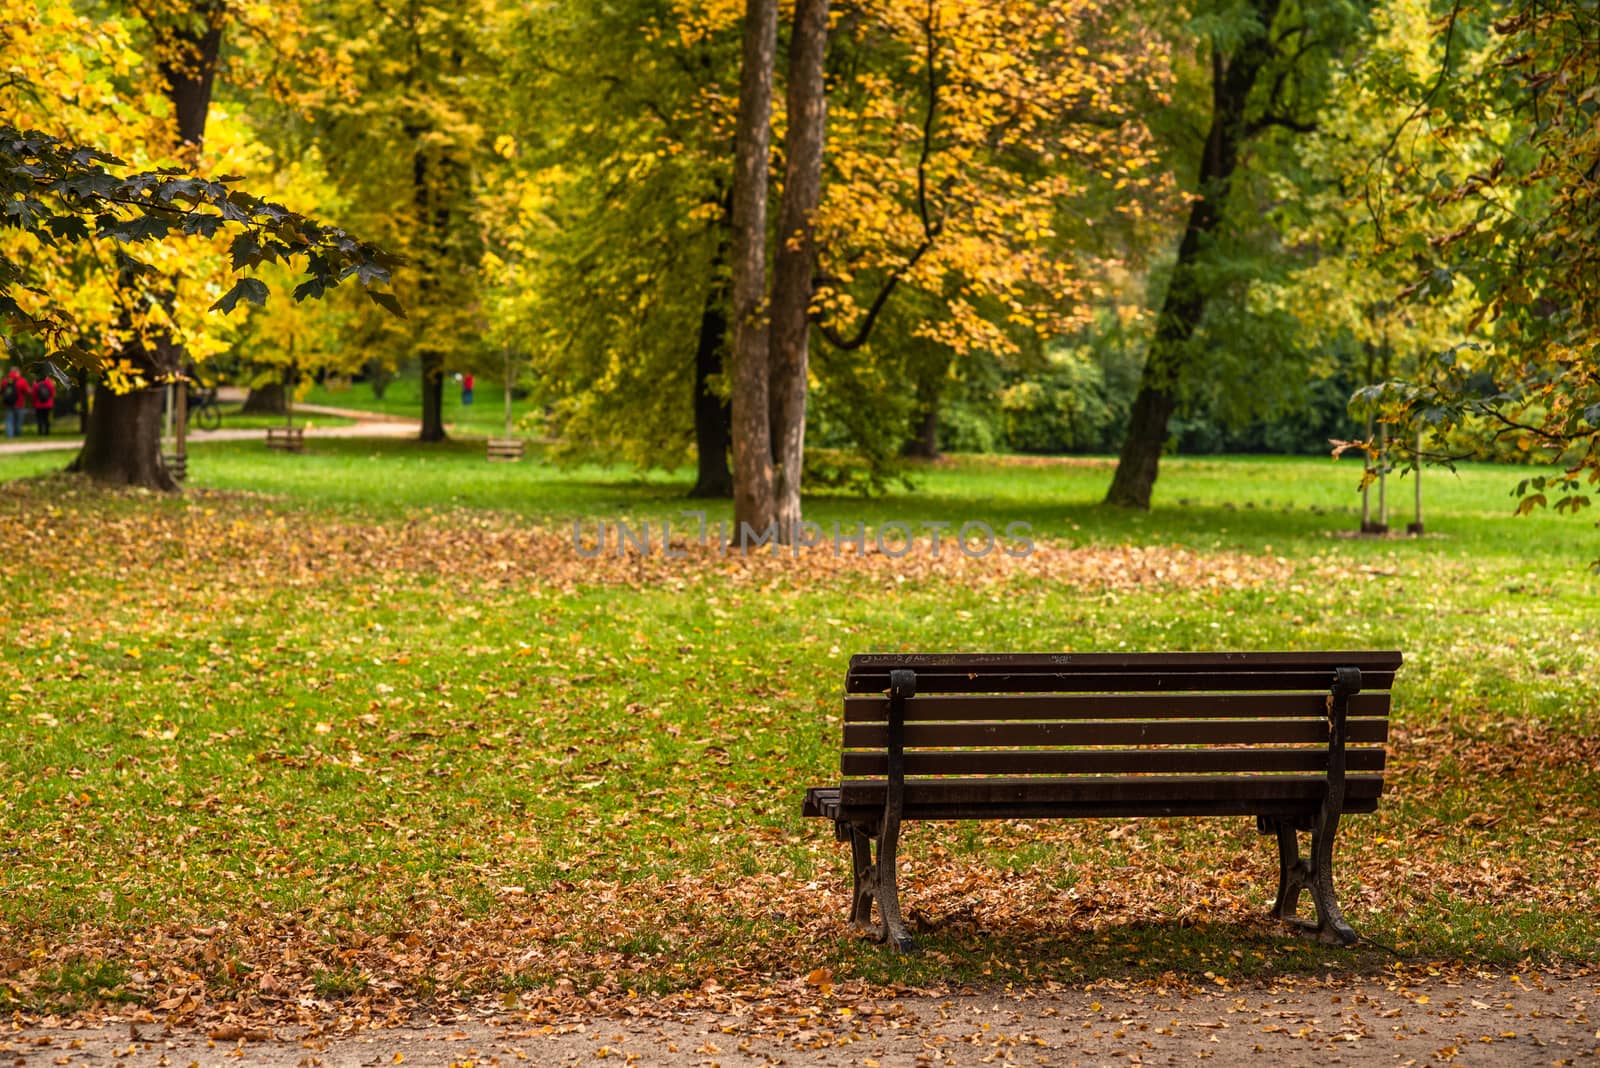 Empty wooden bench surrounded by colorful trees